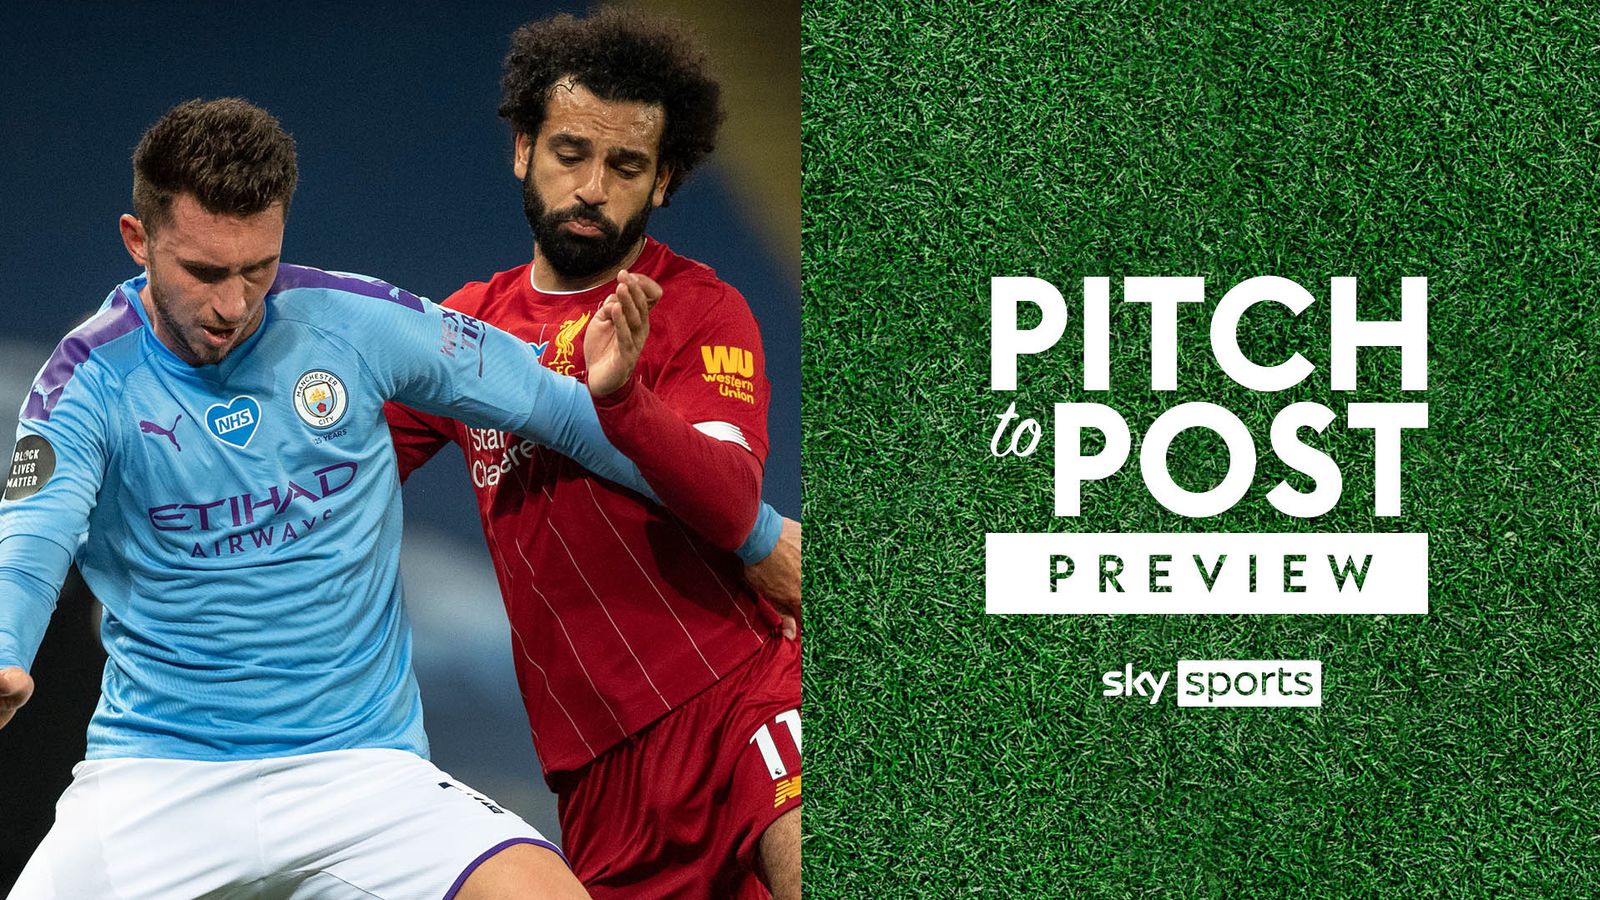 Man City Vs Liverpool Jamie Carragher Assesses The Big Clash On This Week S Pitch To Post Preview Podcast Football News Carelyst